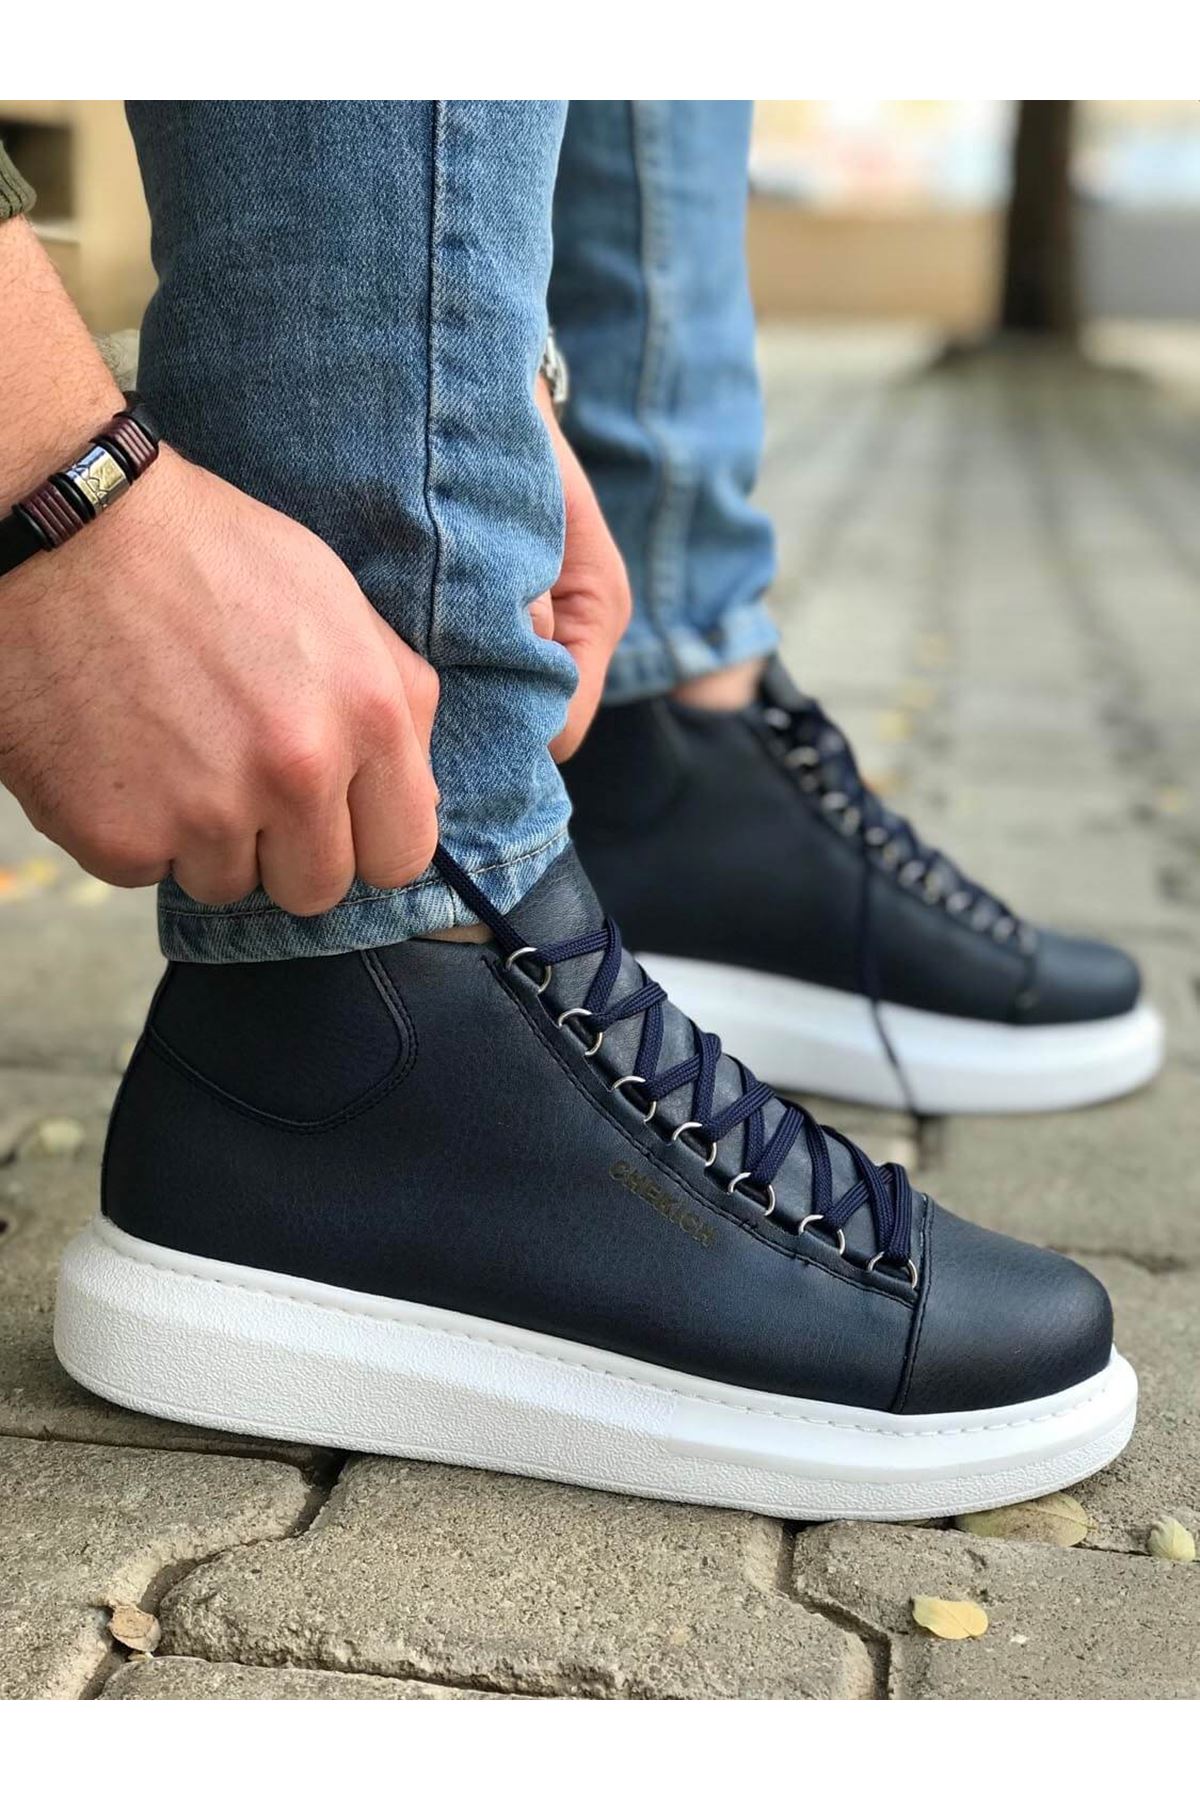 Chekich Men's and Women's Shoes White Non Leather Spring Autumn Seasons Lace Up Unisex Sneakers Comfortable Ankle Gentlemen Fashion Wedding Orthopedic Walking Sport Lightweight Odorless Breathable Warm Boots CH258 V1